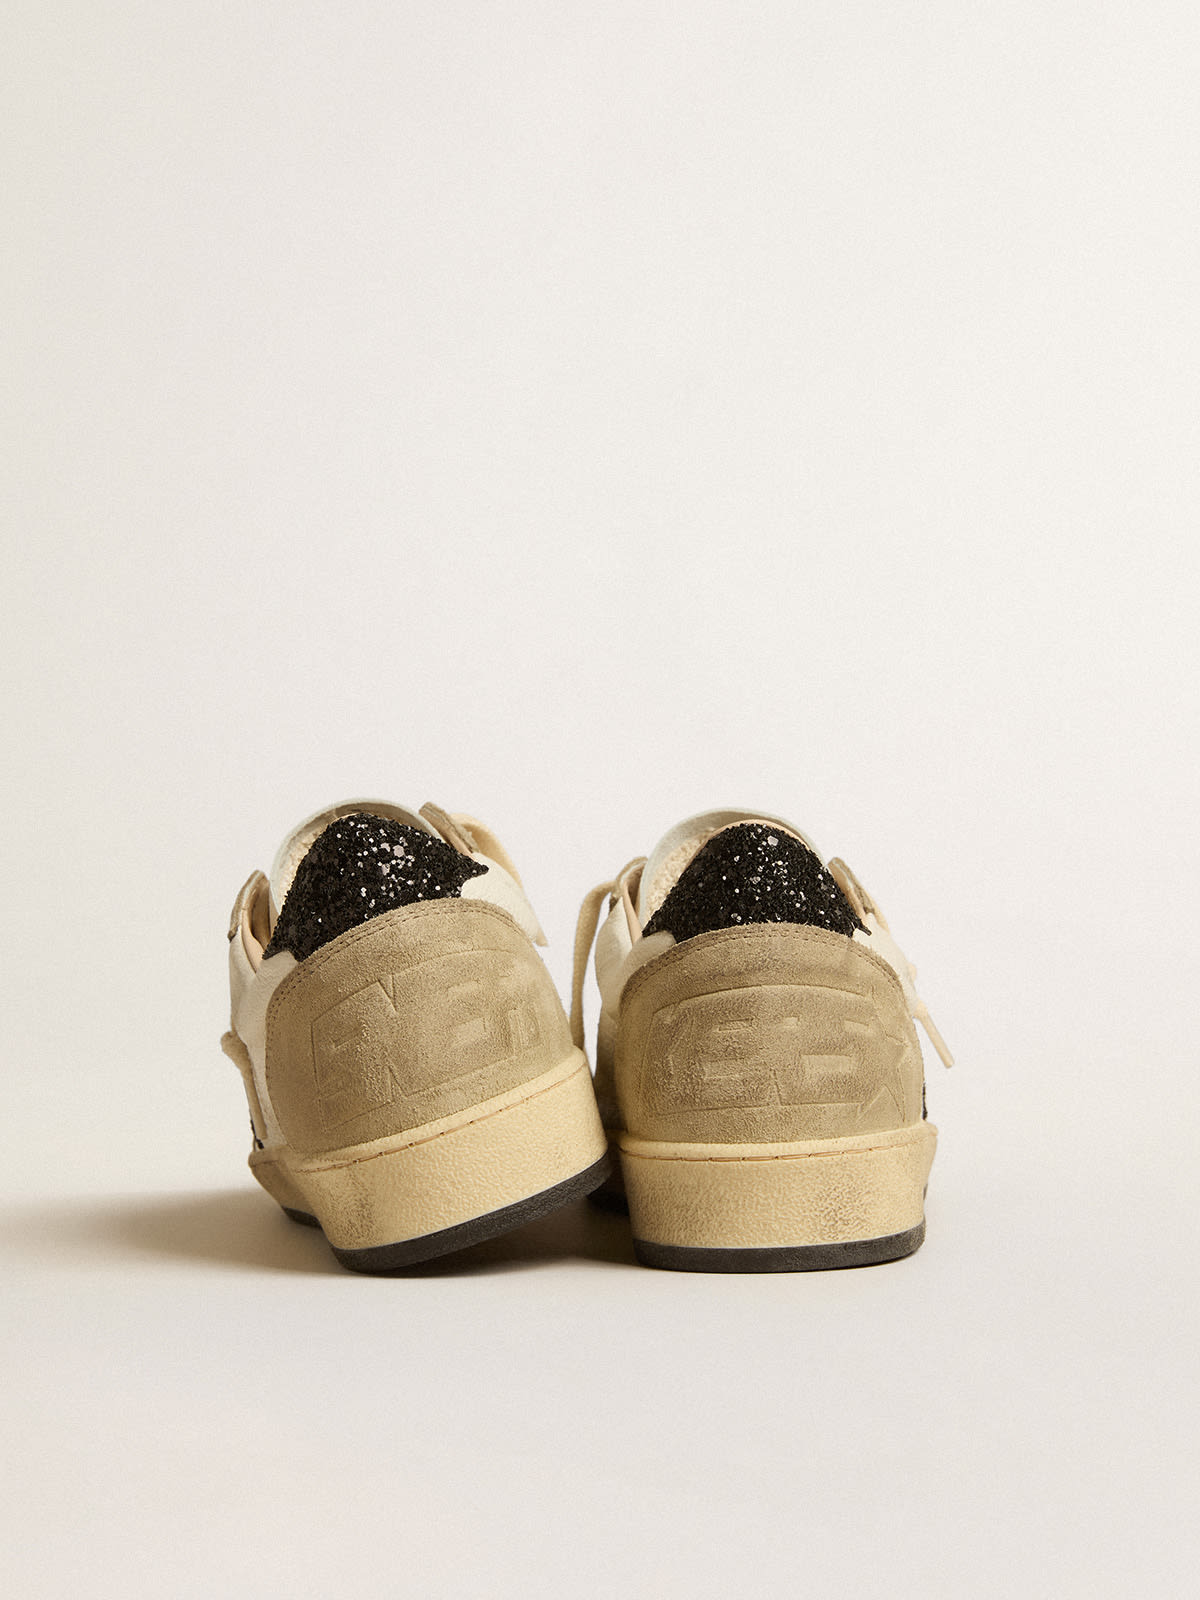 Golden Goose - Ball Star in nappa and suede with black glitter star and heel tab in 